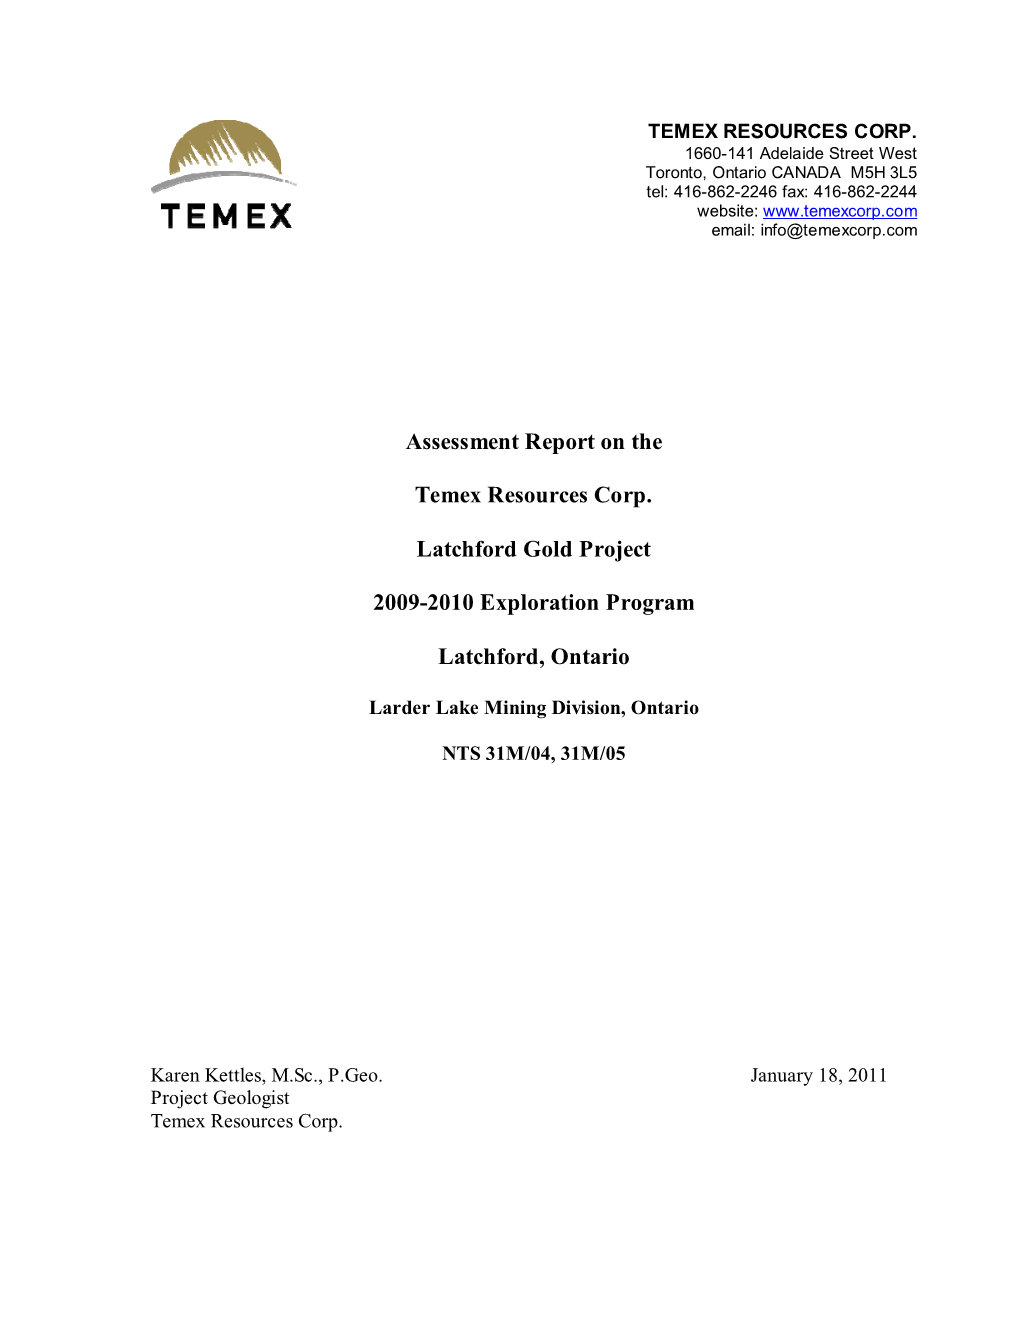 Assessment Report on the Temex Resources Corp. Latchford Gold